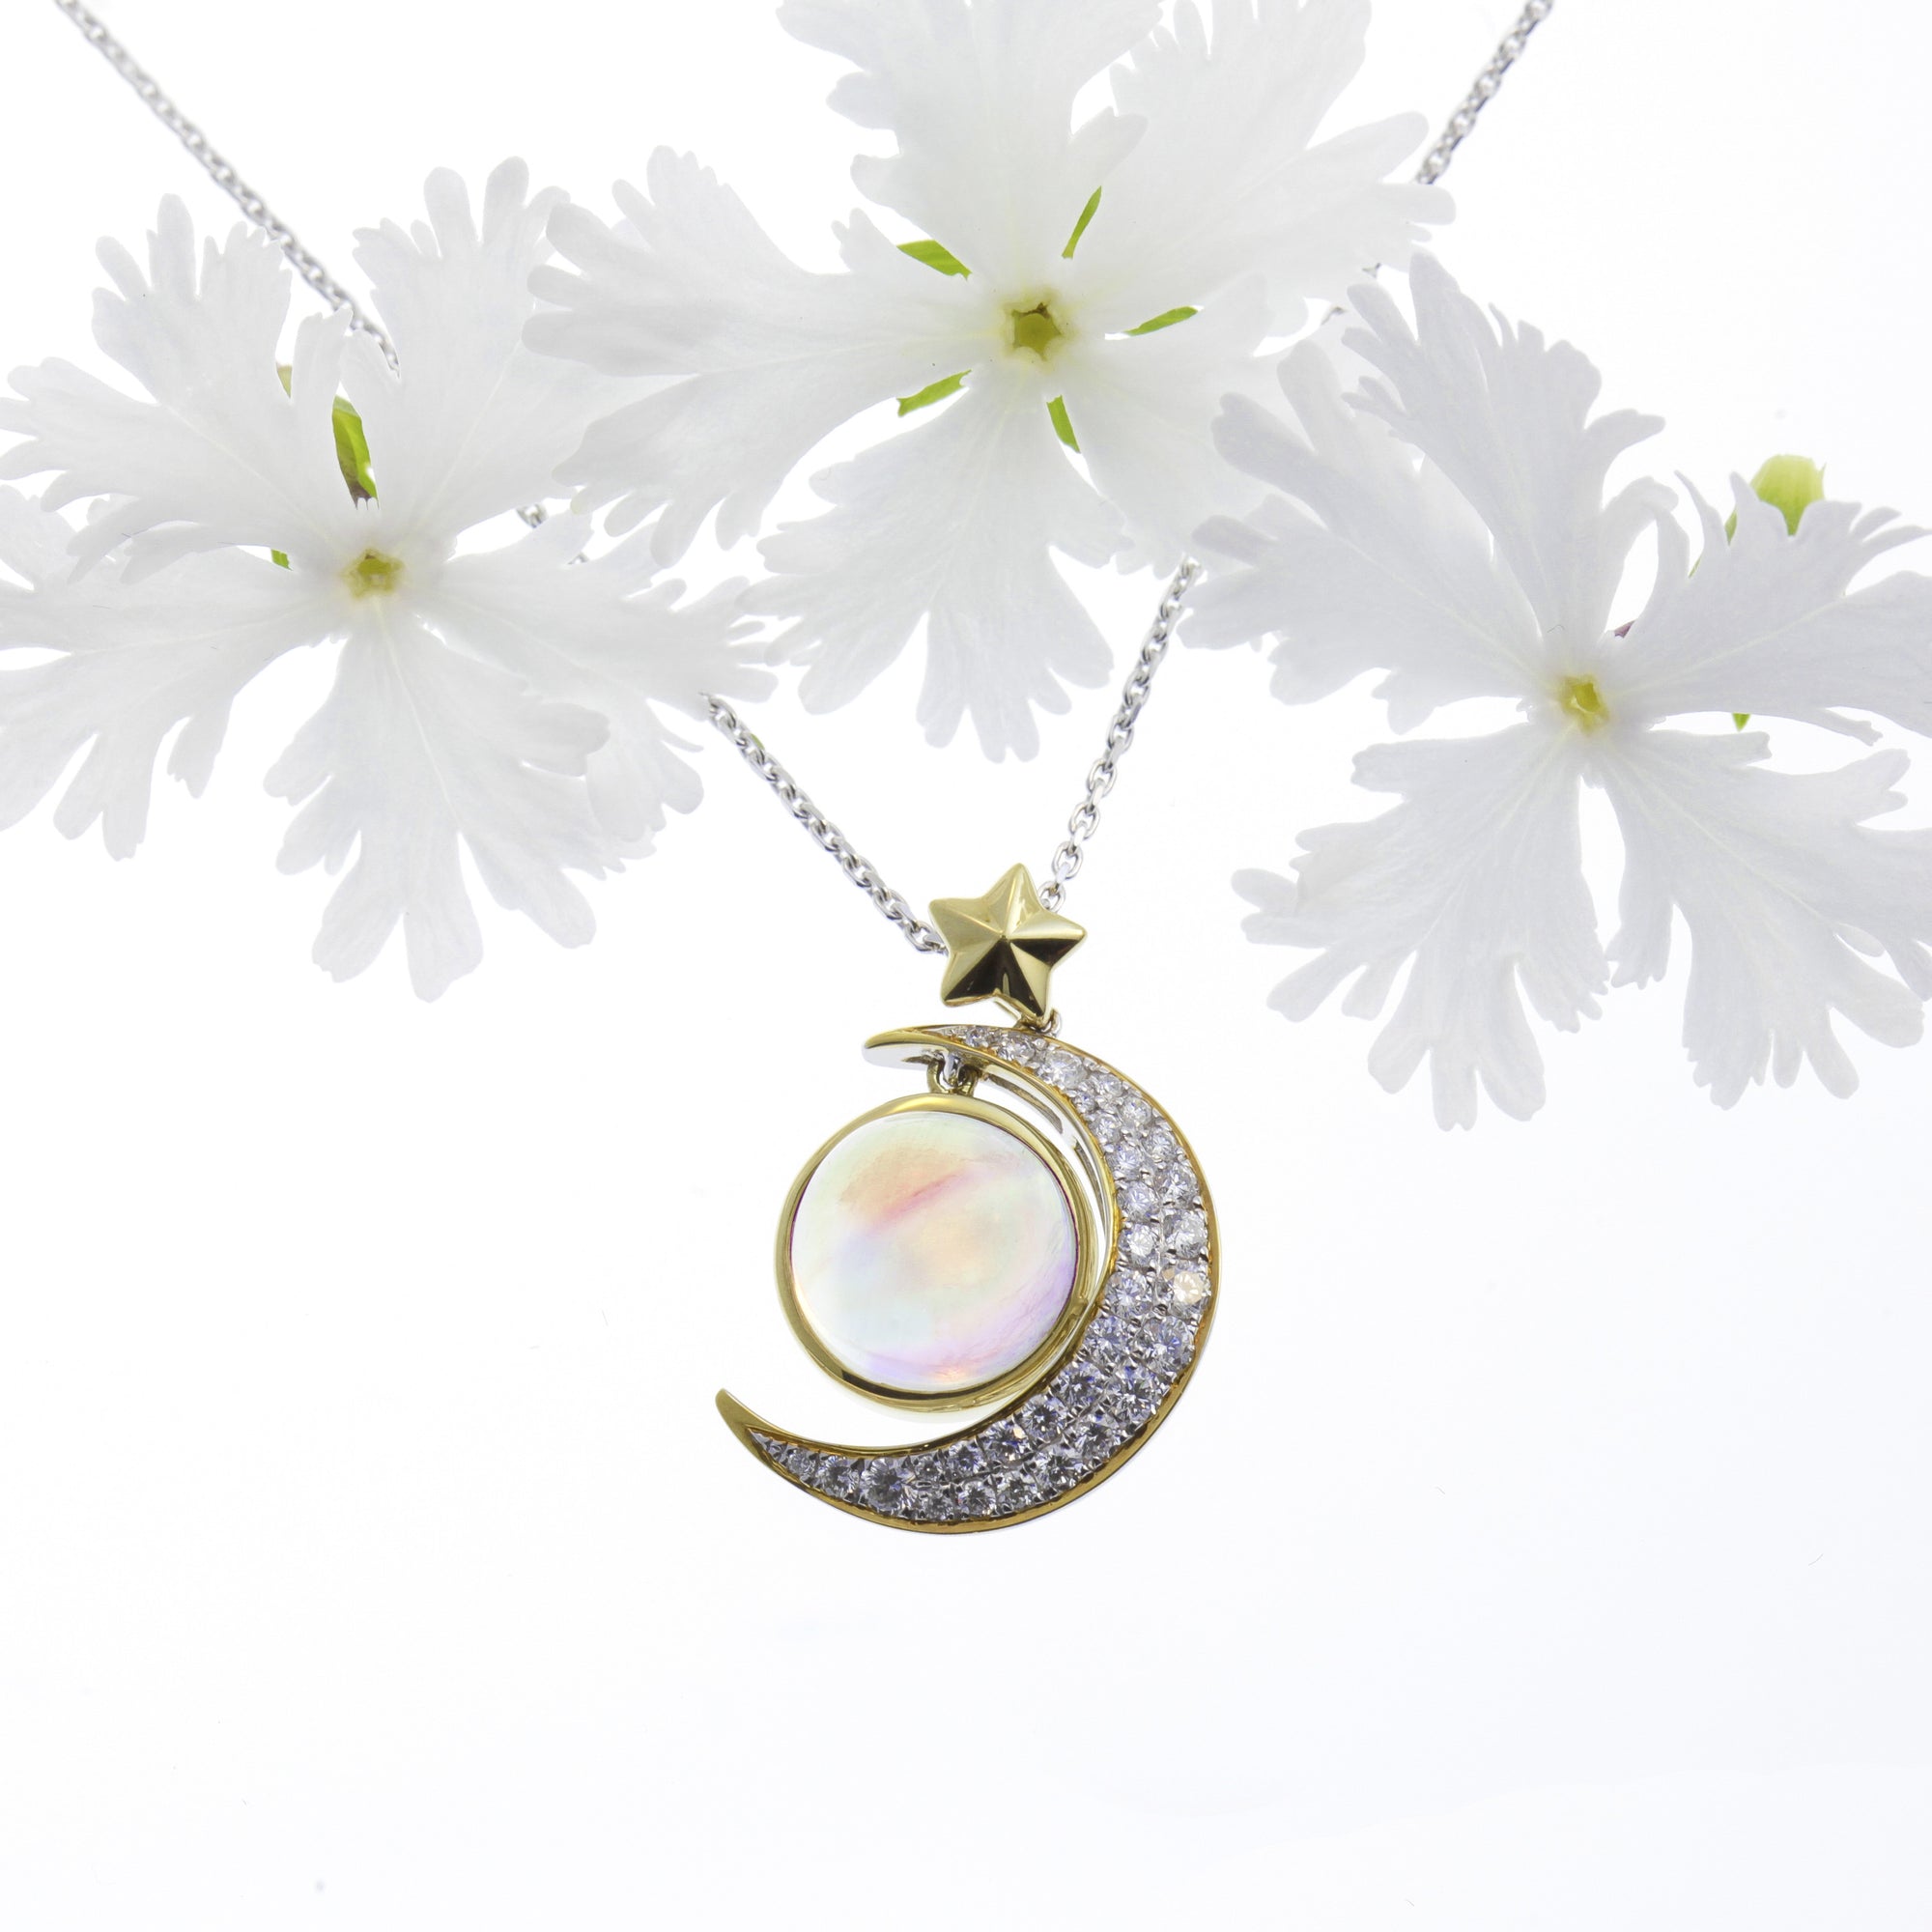 One of a kind 18K yellow gold sun, moon, and stars pendant